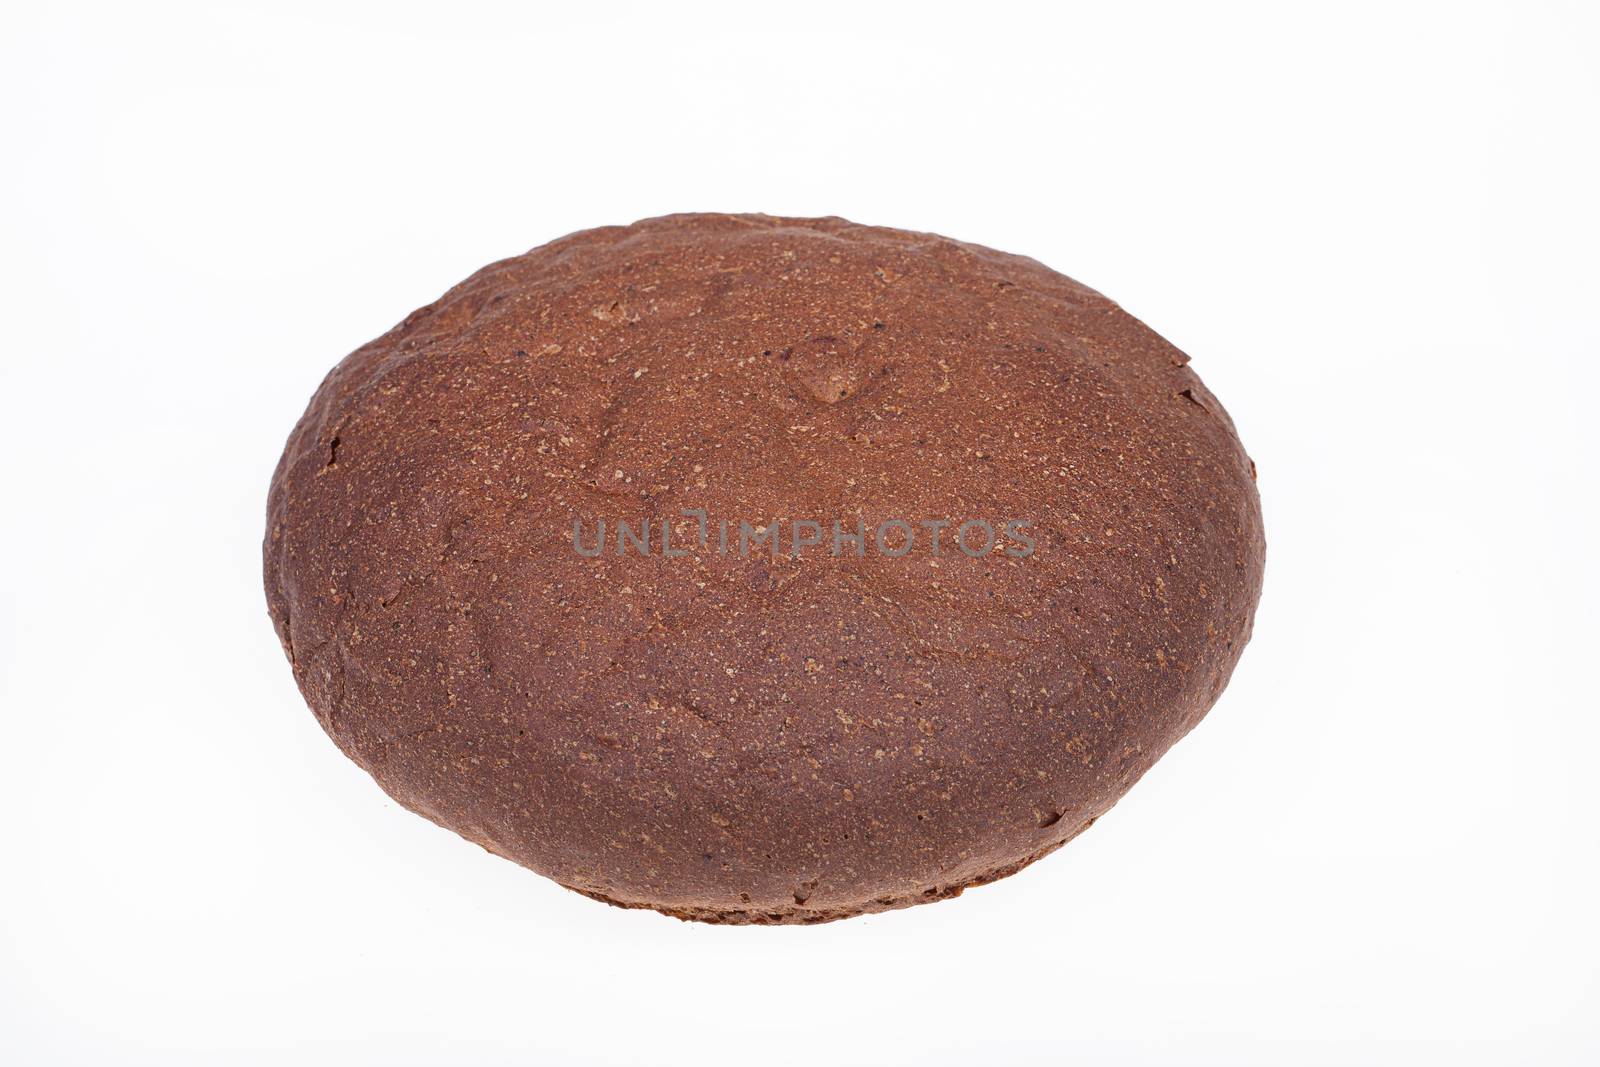 Loaf of bread on isolated white background